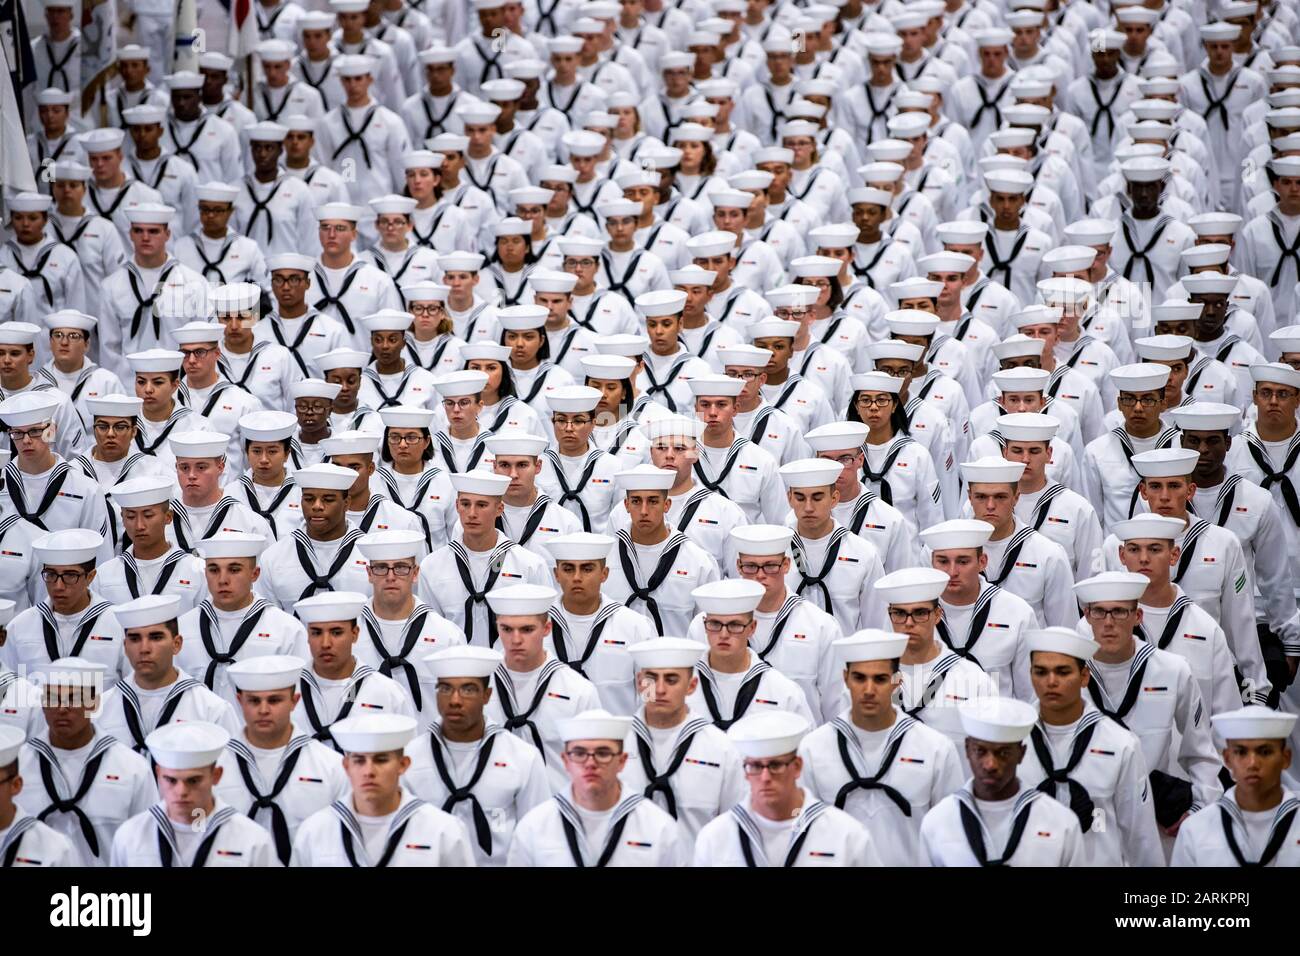 190906-N-PL946-1098 GREAT LAKES, Ill. (Sept. 6, 2019) Graduating recruits stand in formation inside Midway Ceremonial Drill Hall during a pass in review graduation ceremony at Recruit Training Command. More than 35,000 recruits train annually at the Navy's only boot camp. (U.S. Navy photo by Mass Communication Specialist 1st Class Spencer Fling/Released) Stock Photo